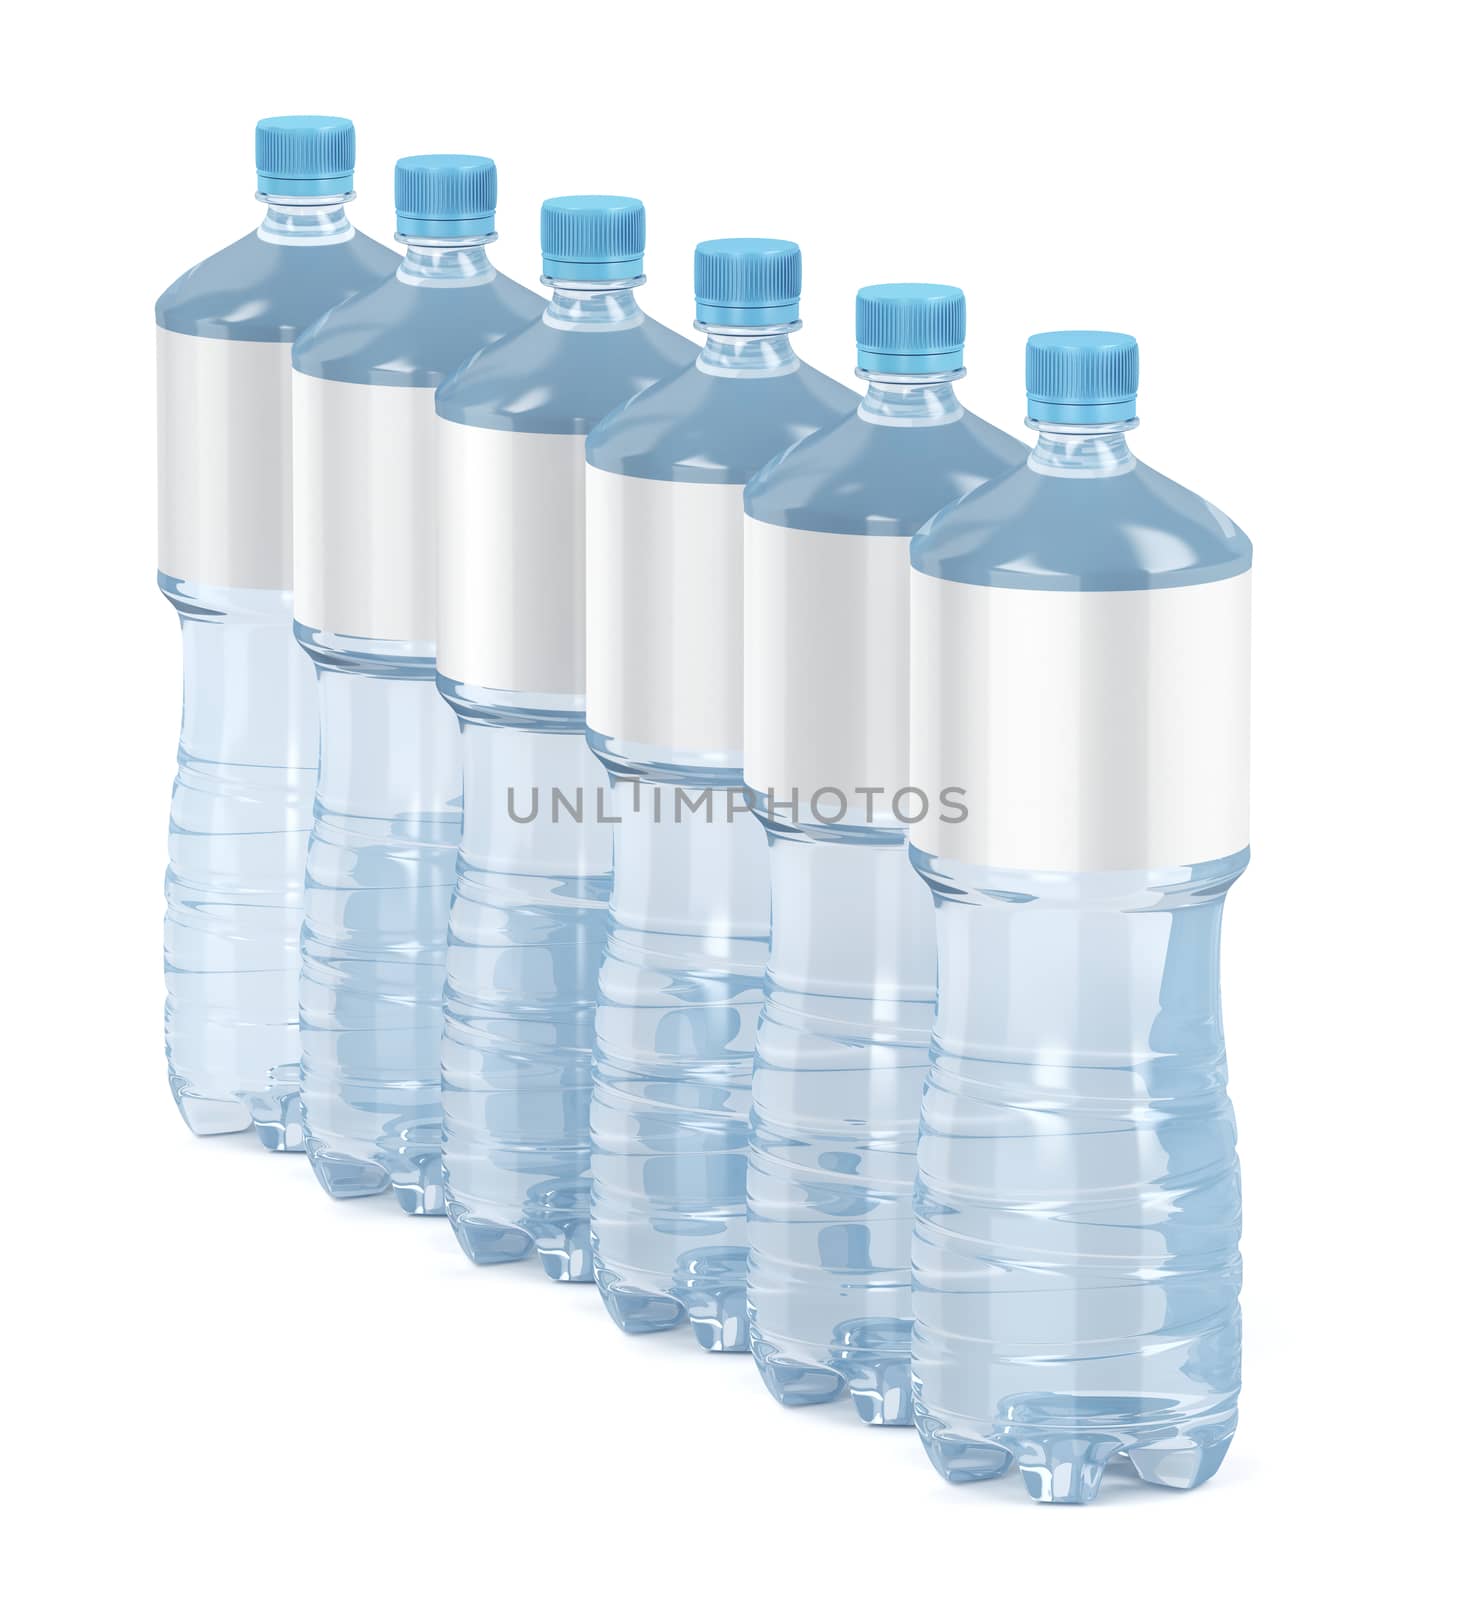 Six water bottles with blank labels by magraphics